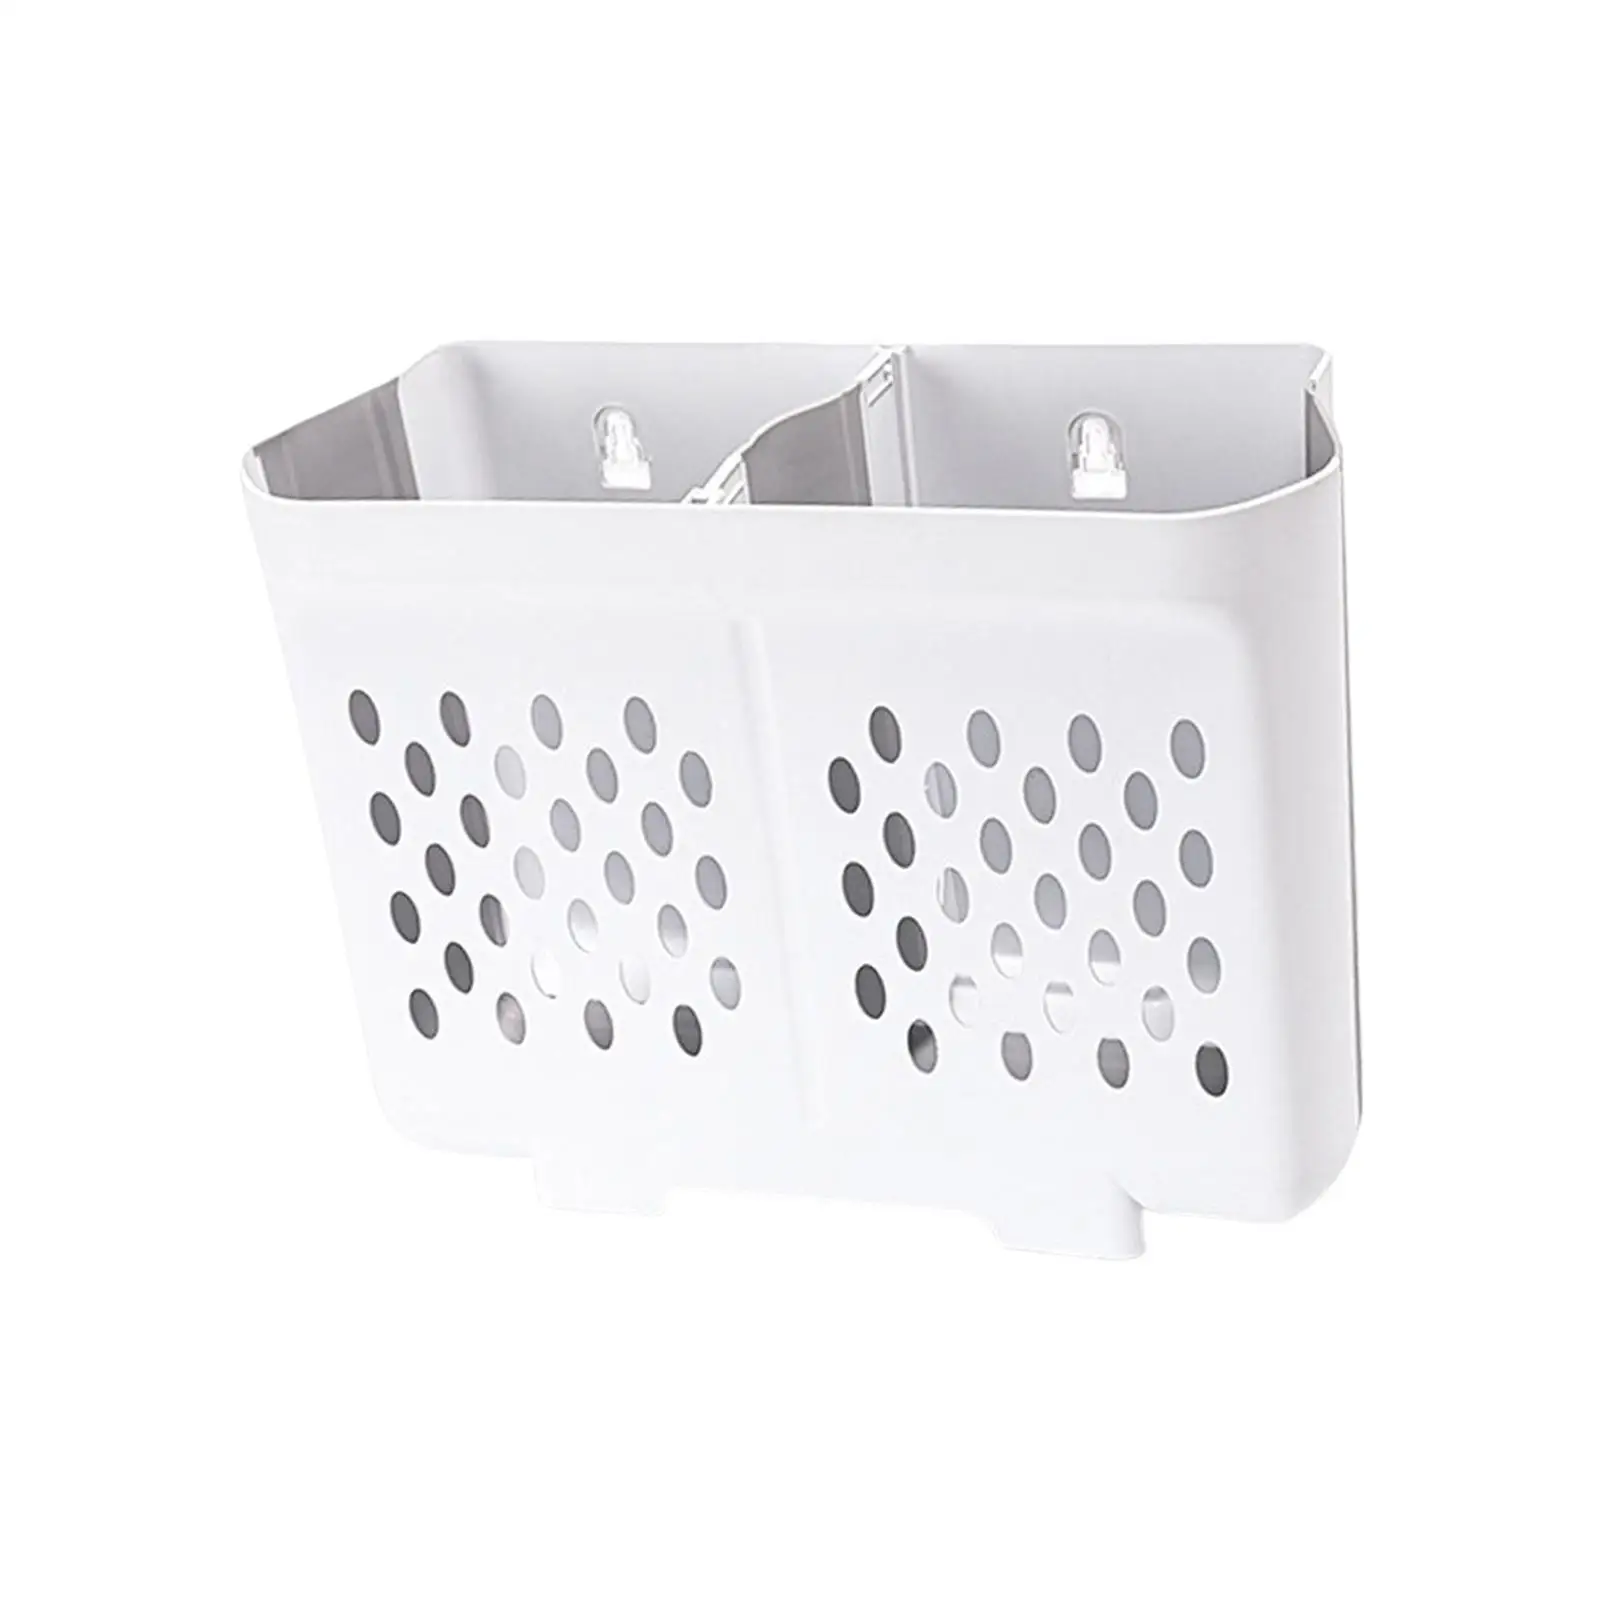 Multifunctional Collapsible Laundry Storage Basket Wall Mount Hollow Design Accessory for College Dorms, Campers Easily Install